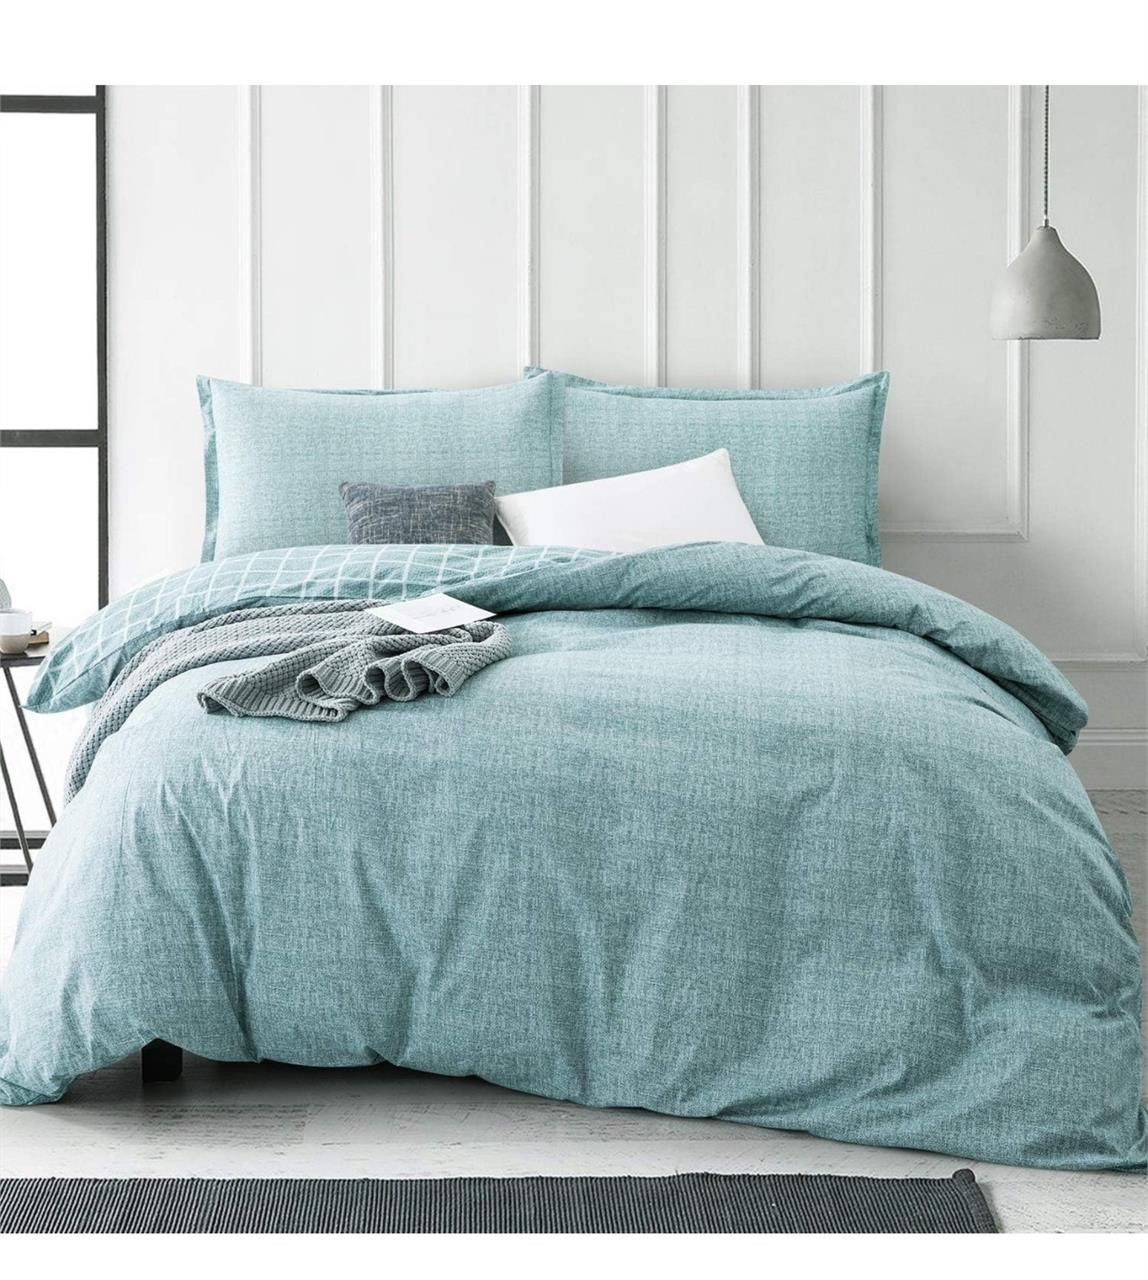 (K) 4 piece bed sheets